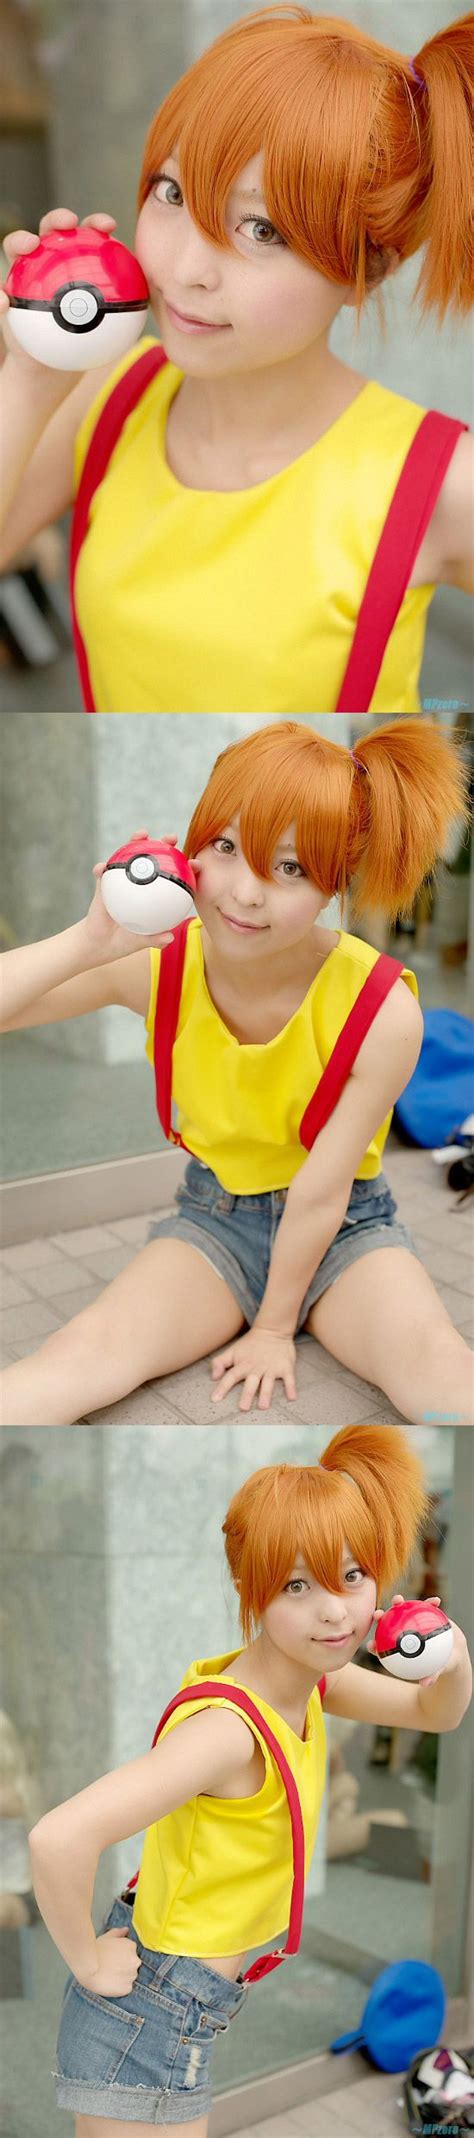 Misty From Pokemon Cosplay By Tomoyo The Sex Pinterest Misty